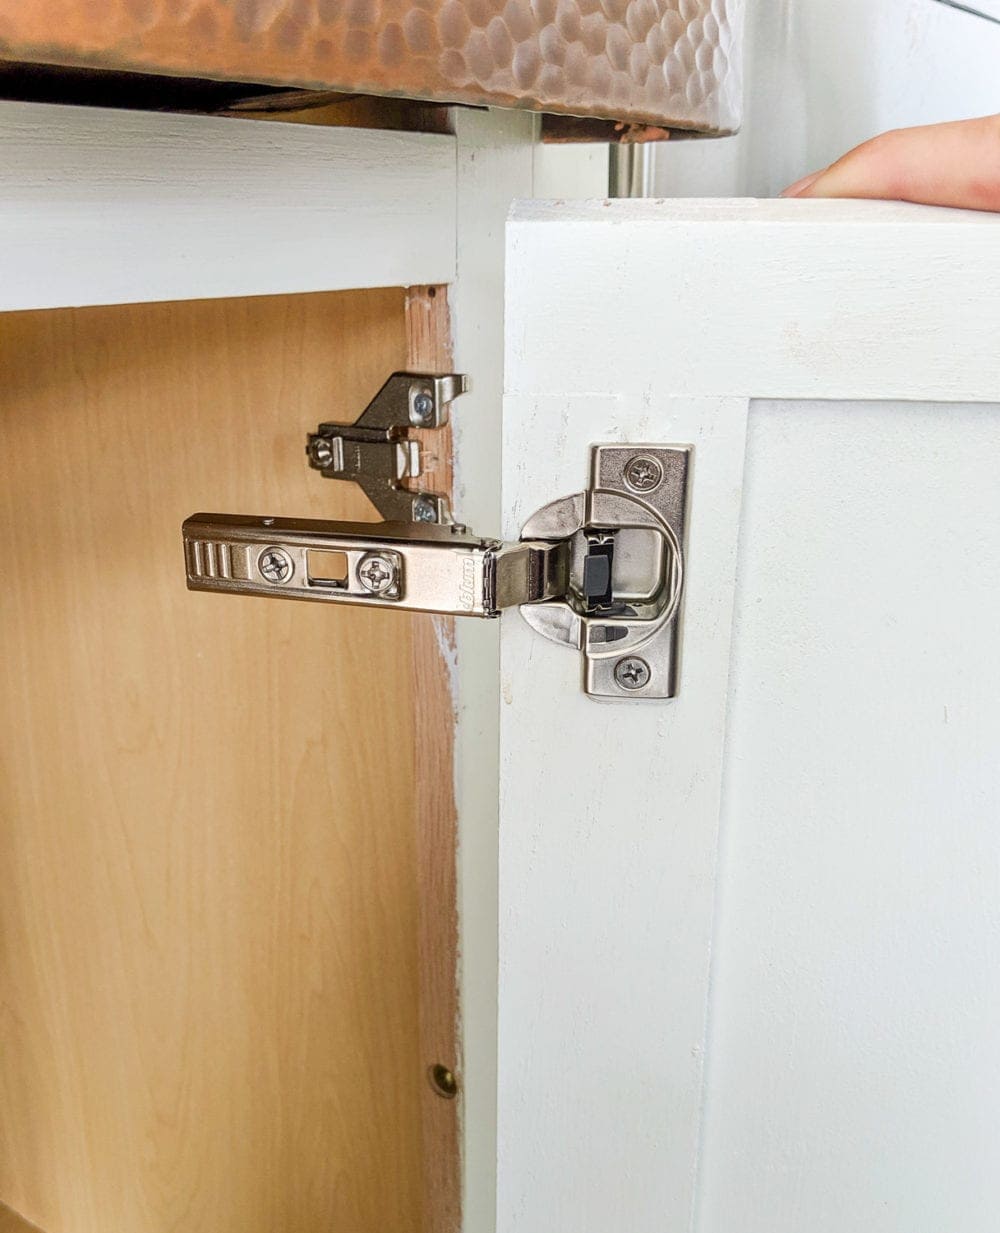 Soft Close Hinges How To Install On Any Cabinet Door